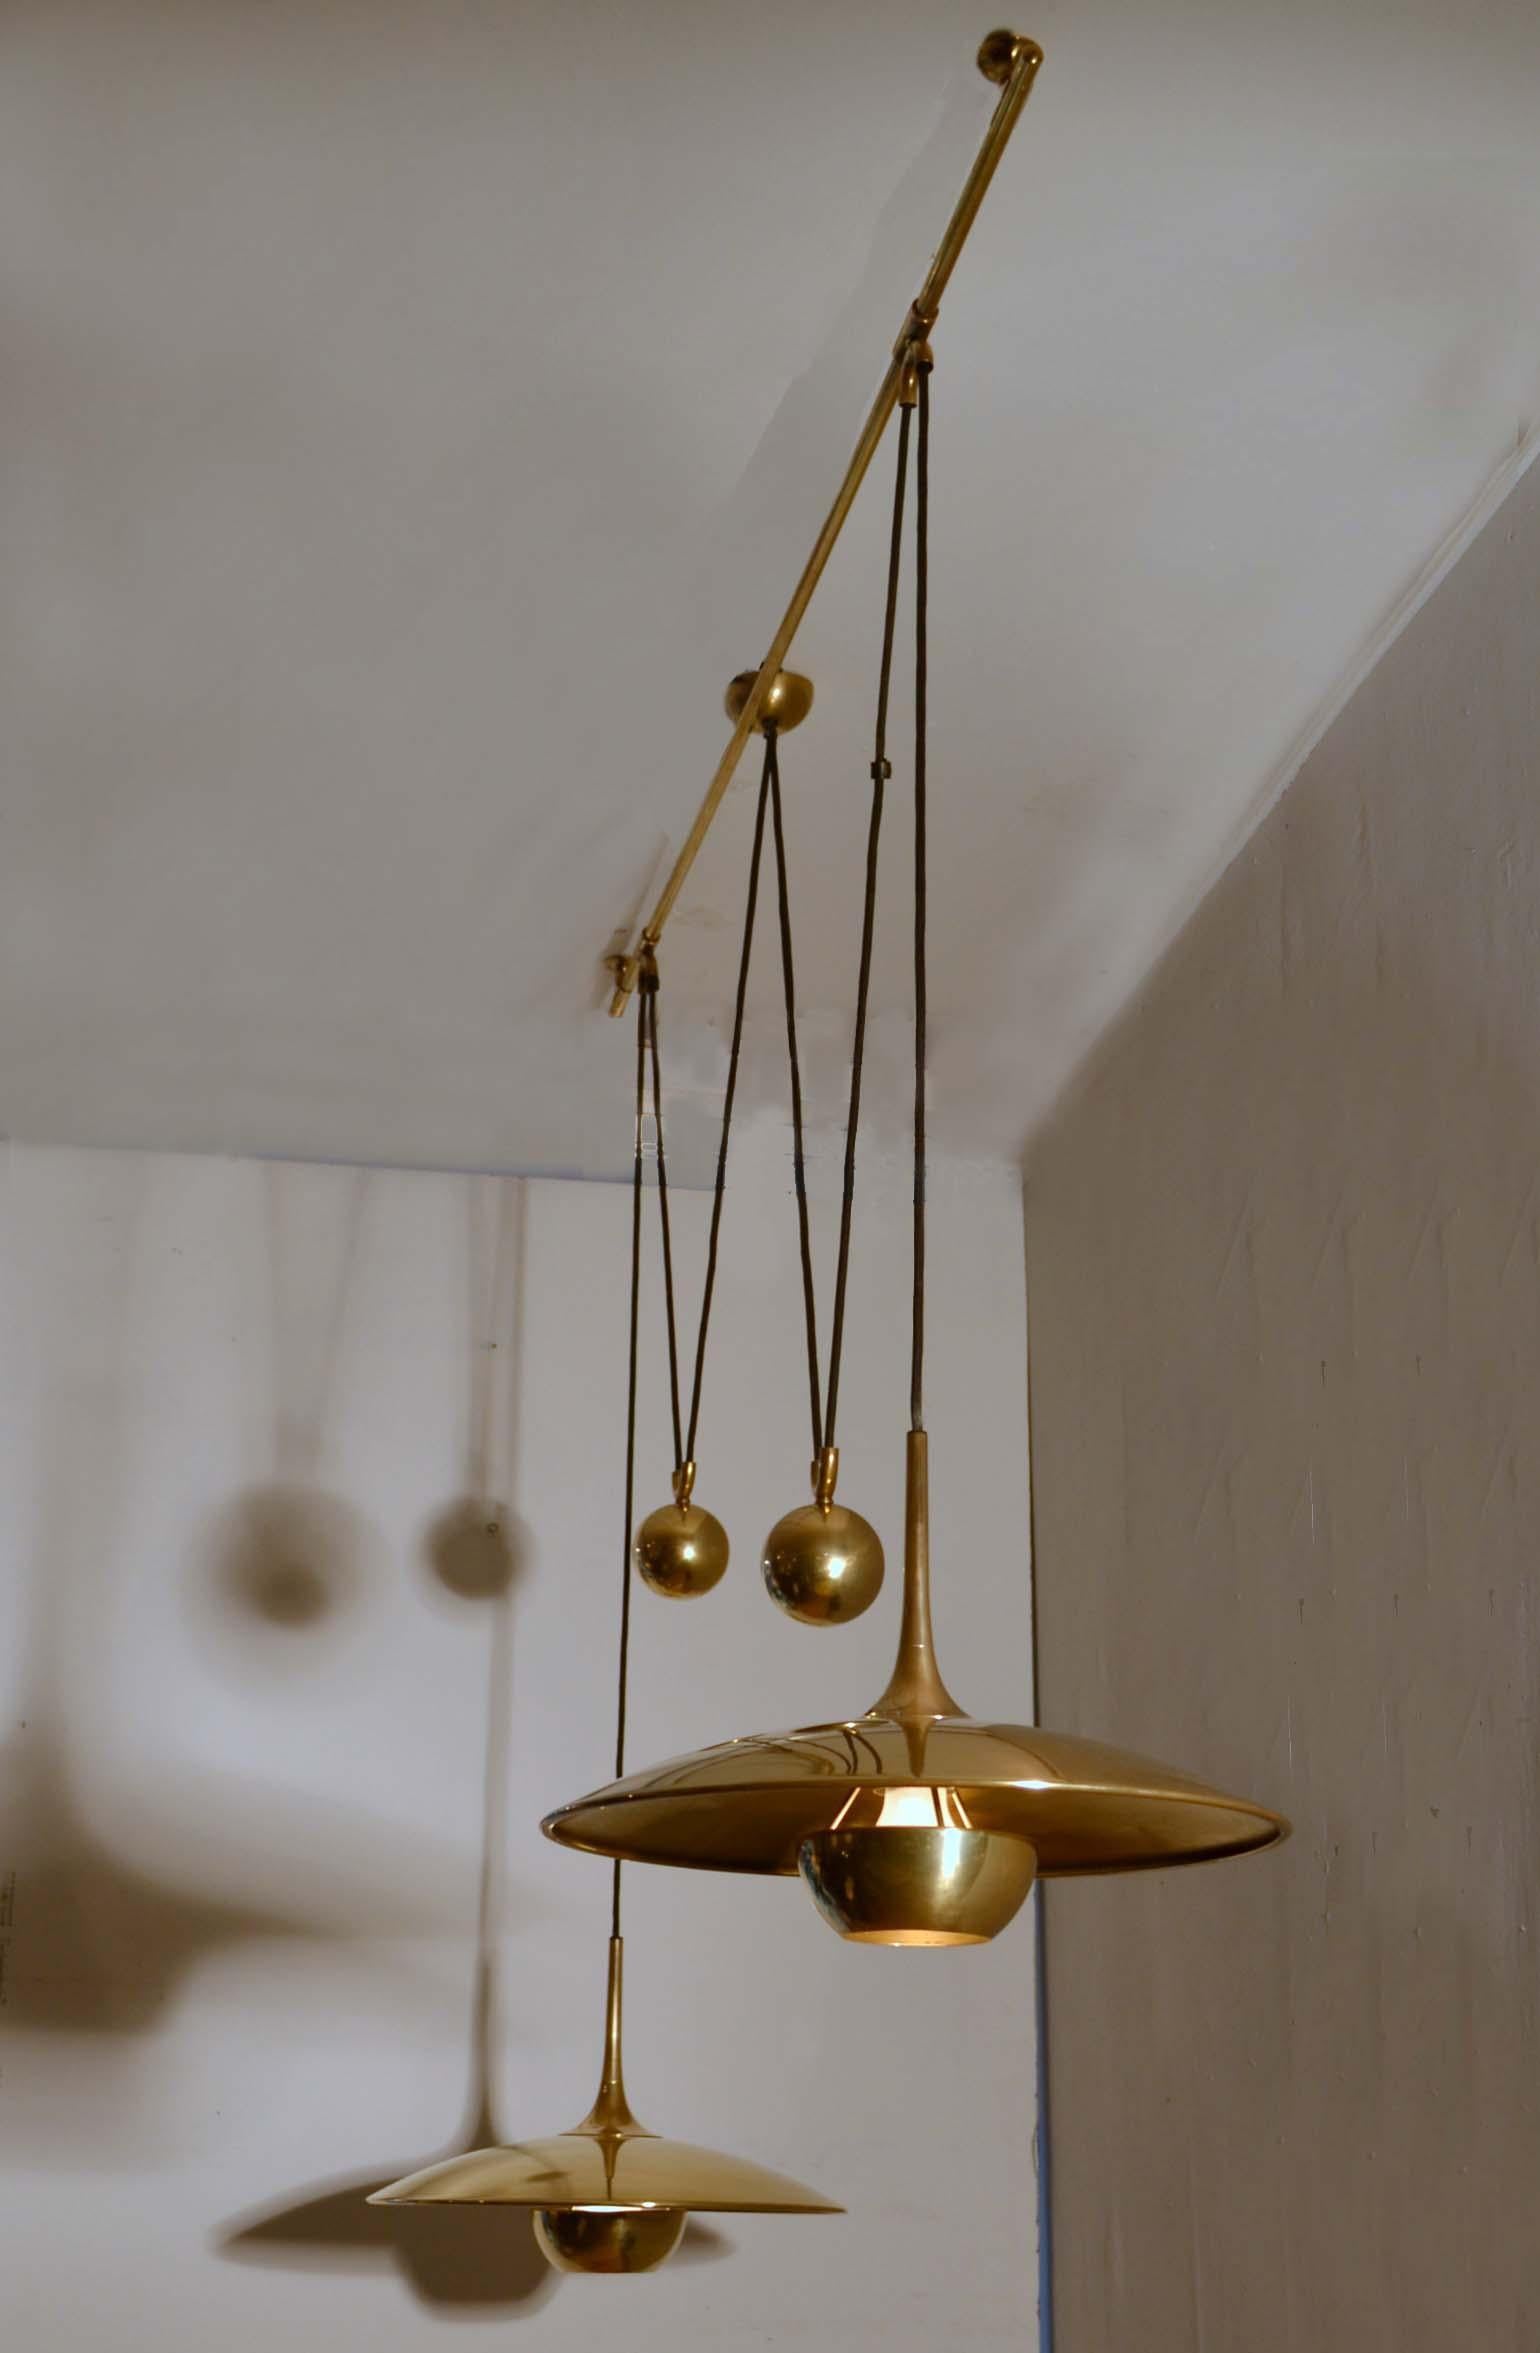 Cast Double Counterbalance Pendant Lamps Onos 40 in Brass by Florian Schulz, 1970s